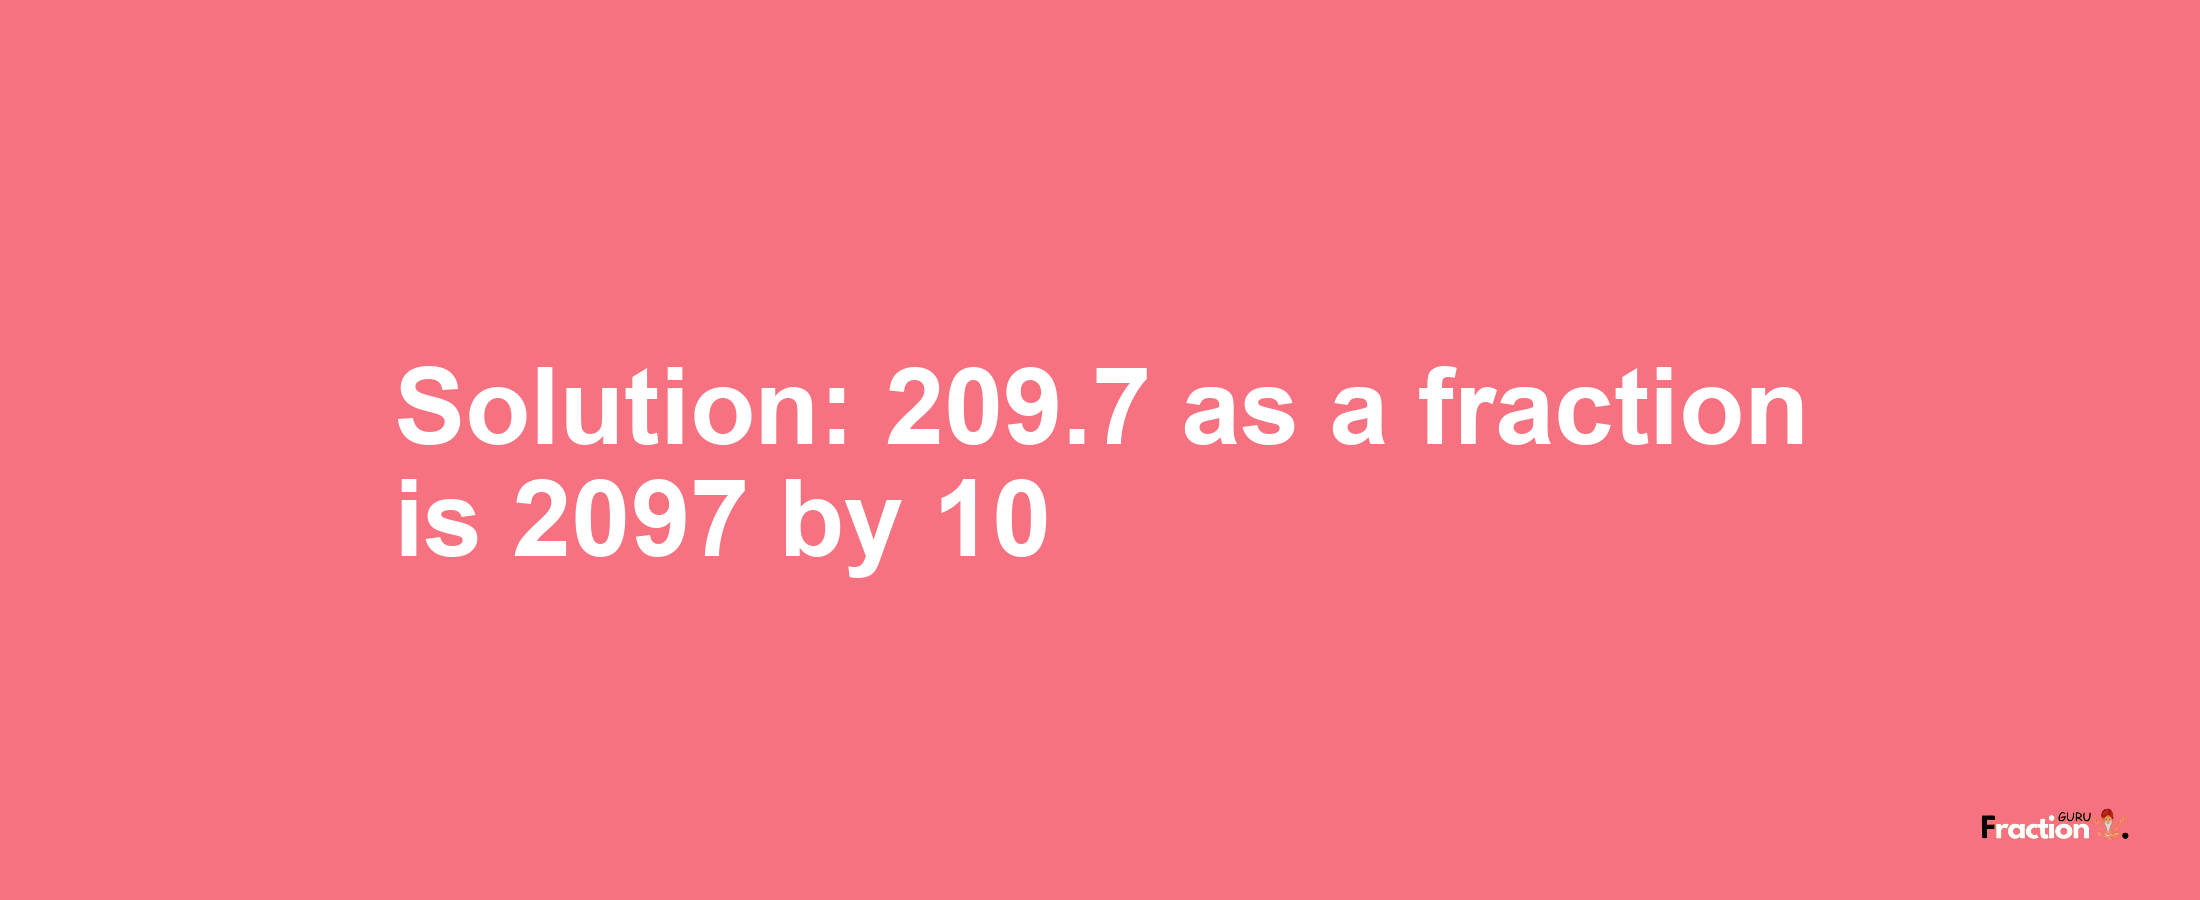 Solution:209.7 as a fraction is 2097/10